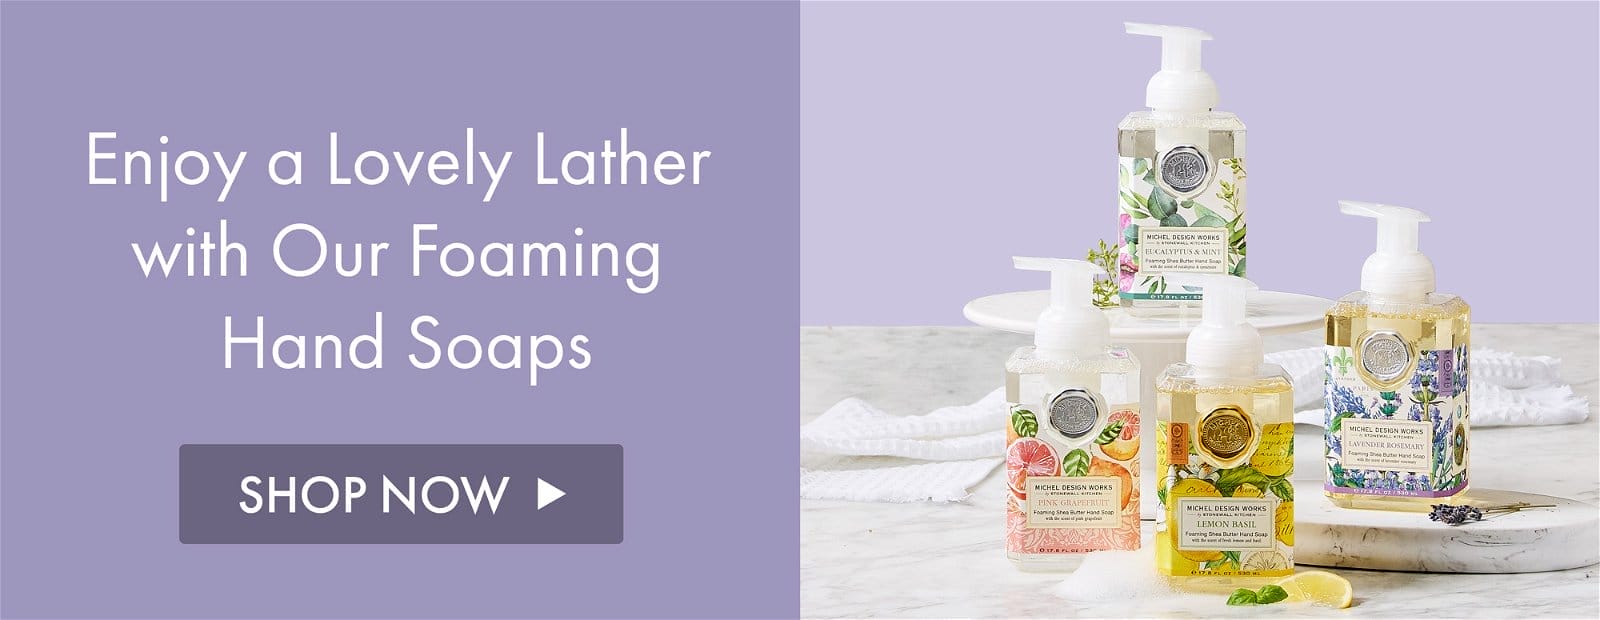 Enjoy a Lovely Lather with Our Foaming Hand Soaps - Shop Now